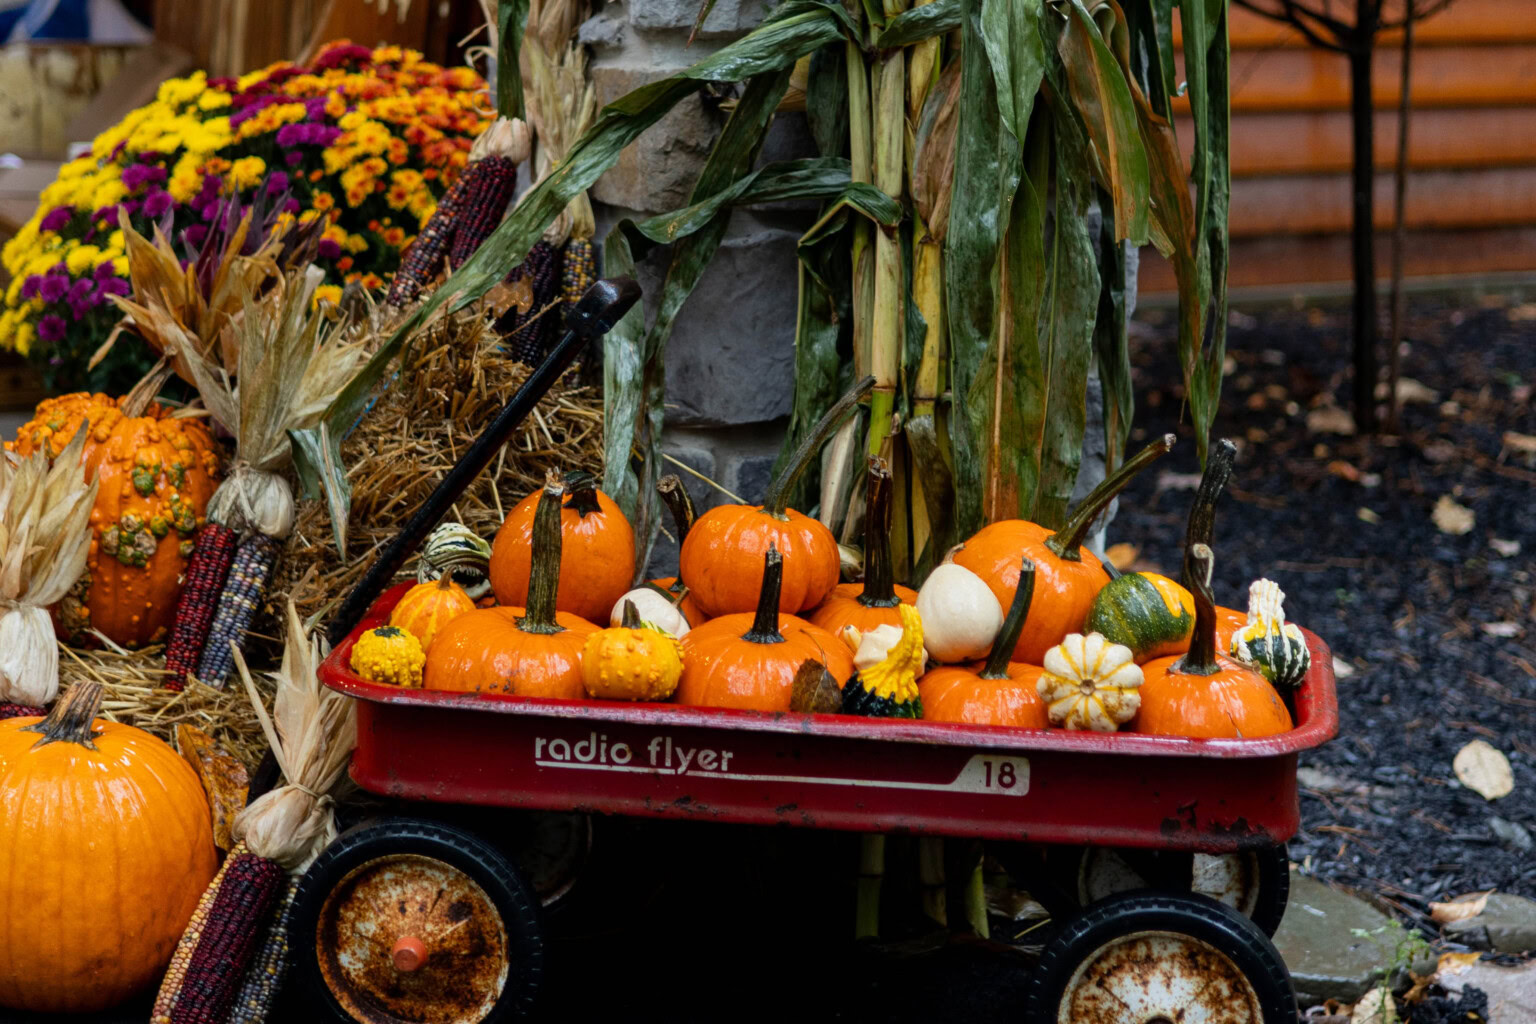 Fall decor - childrens flyer wagon filled with pumpkins.